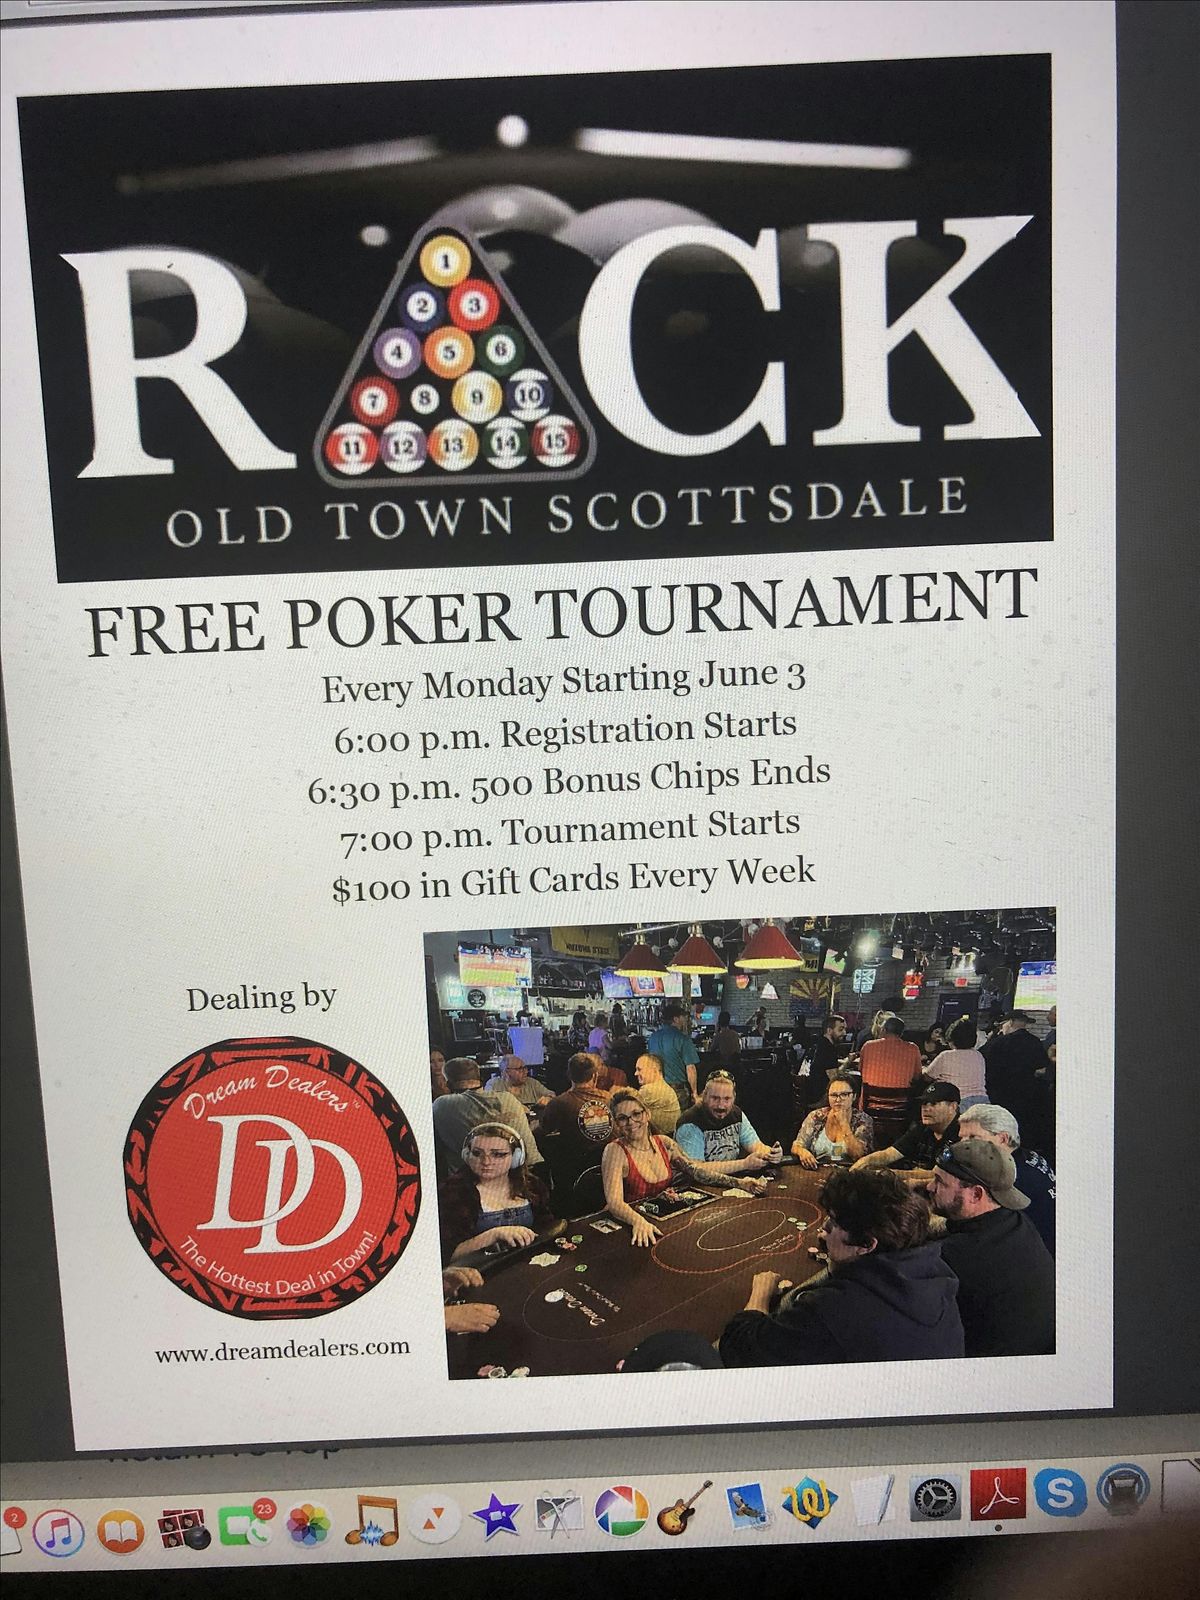 Free poker with the Dream Dealers